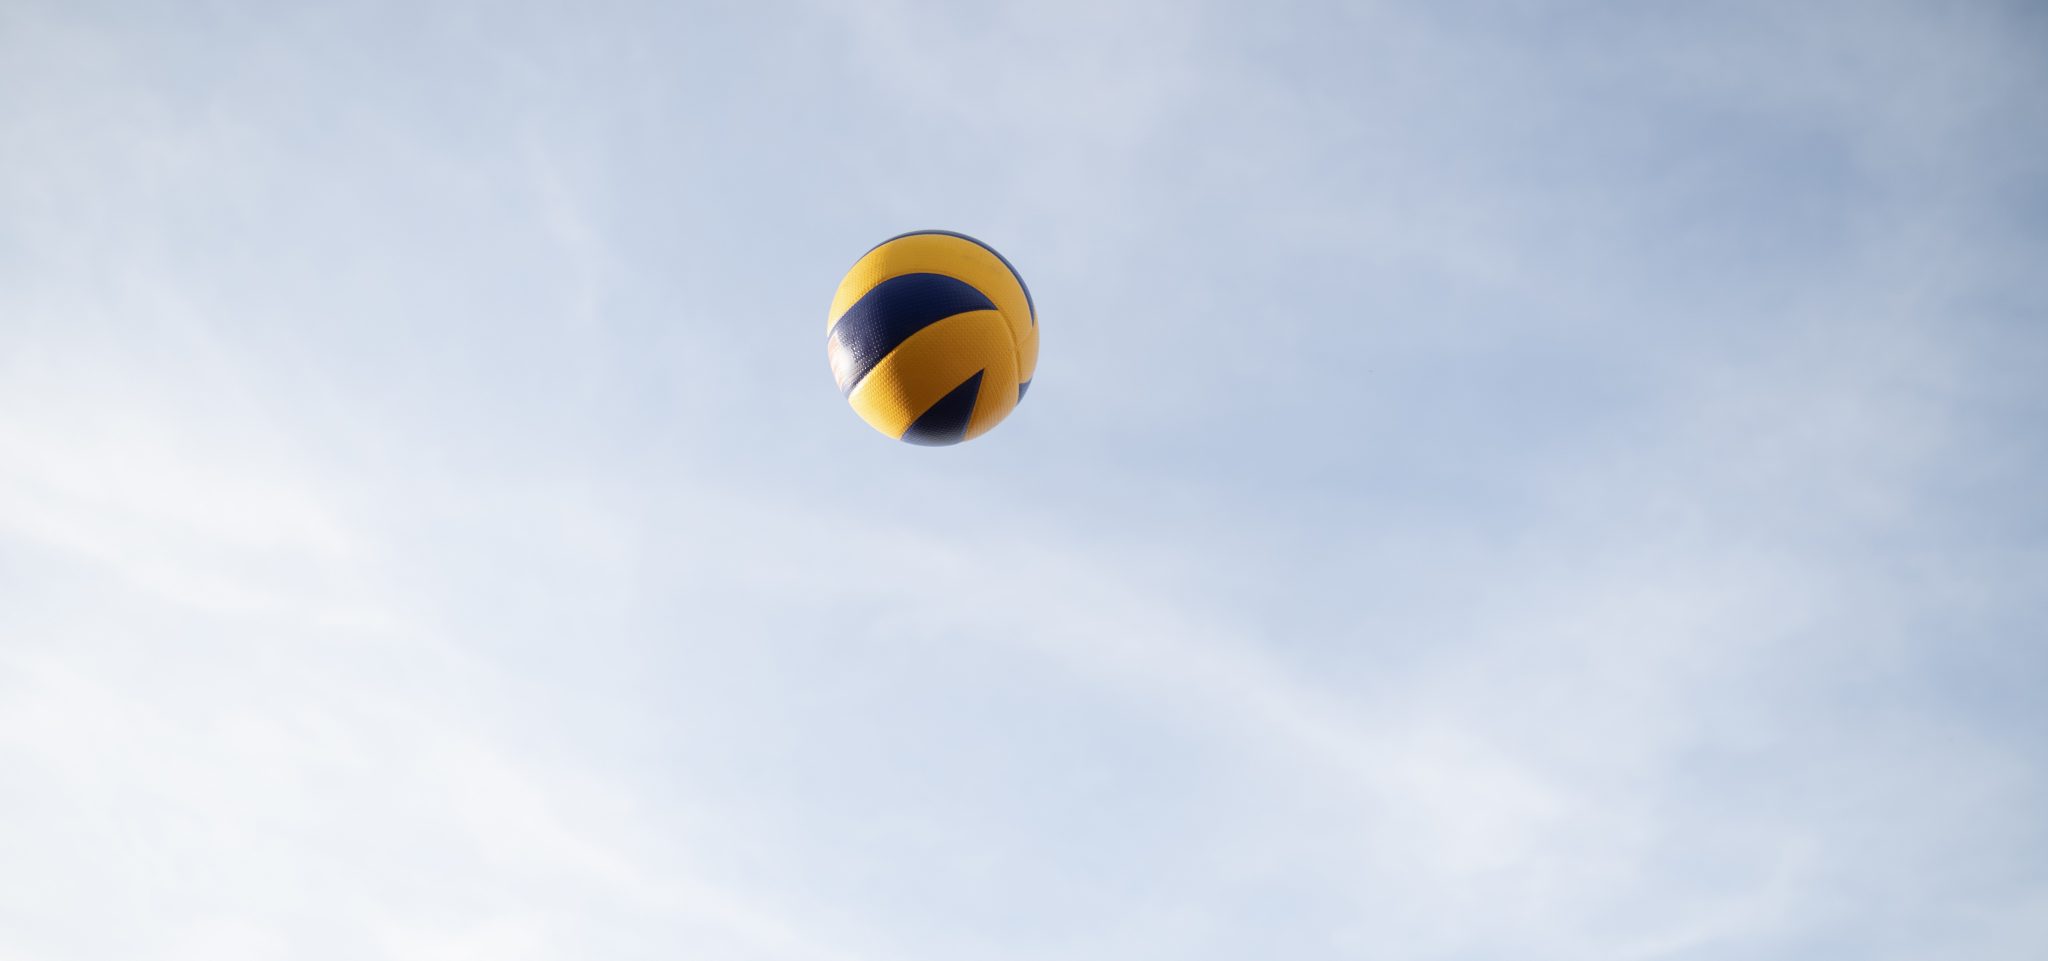 A volleyball flying through the air against a sunny, blue sky